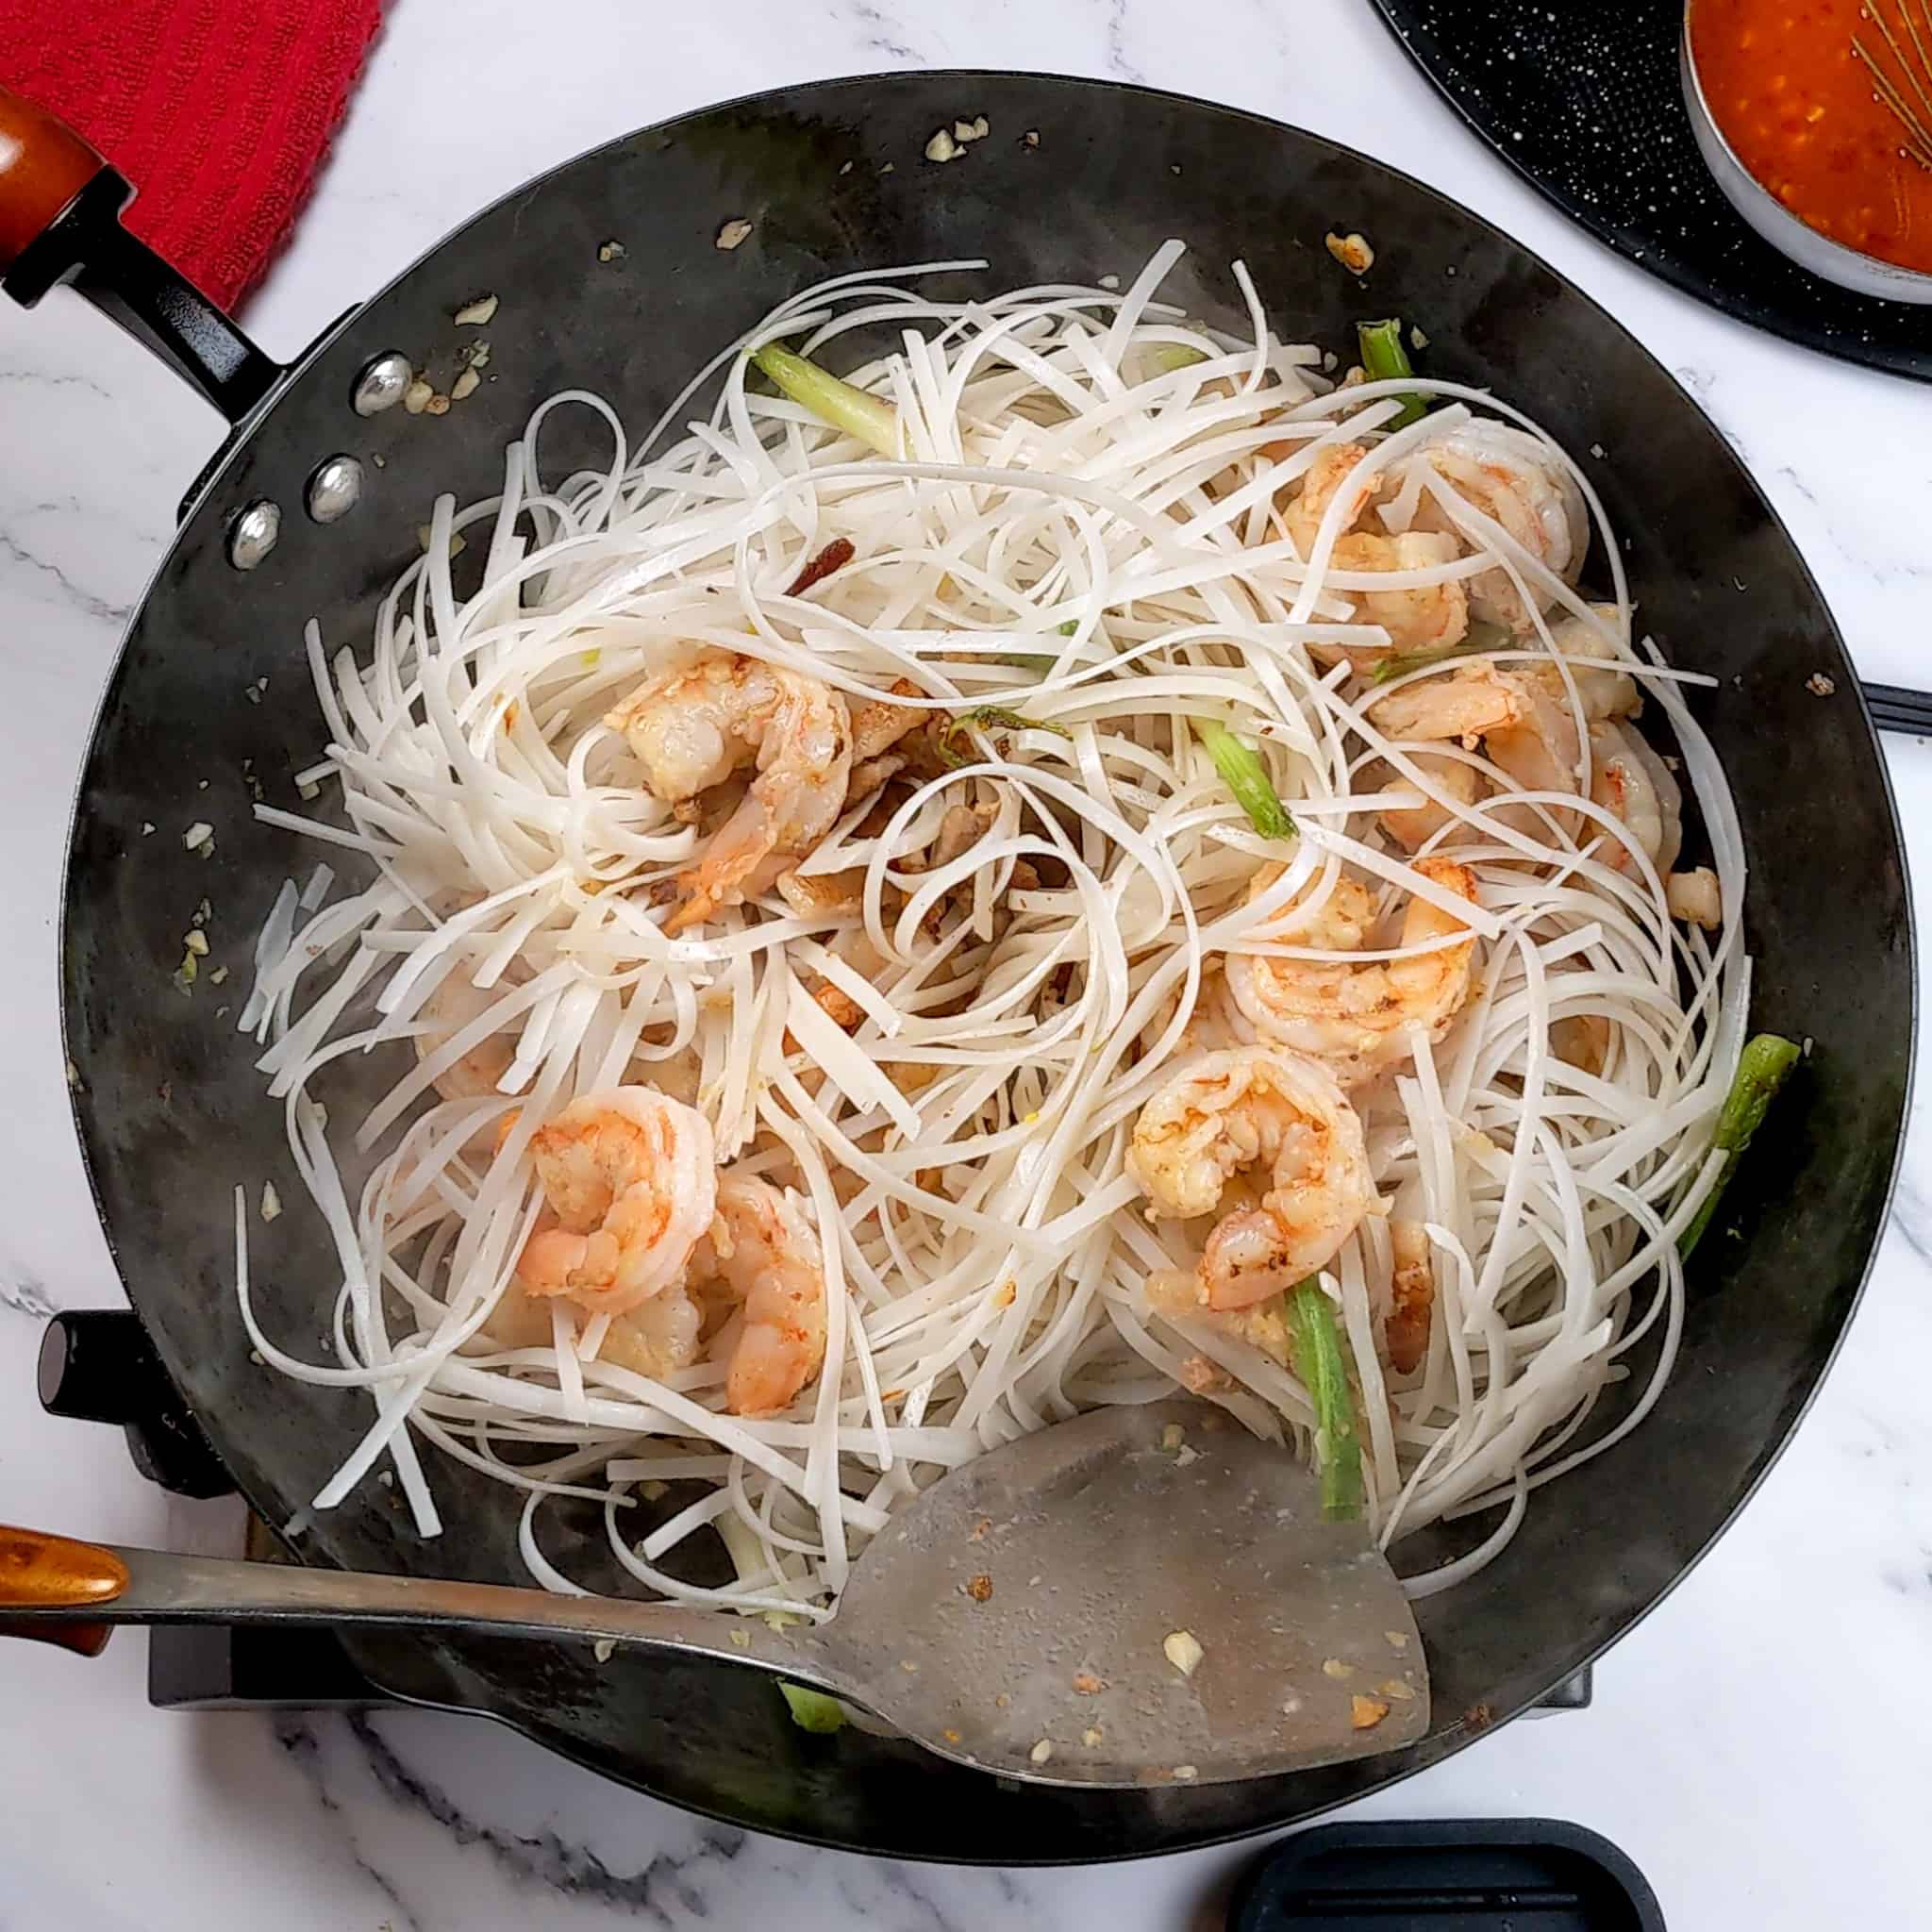 raw soaked pad thai noodles added to the shrimp and scallion mixture stir-fry in a wok.